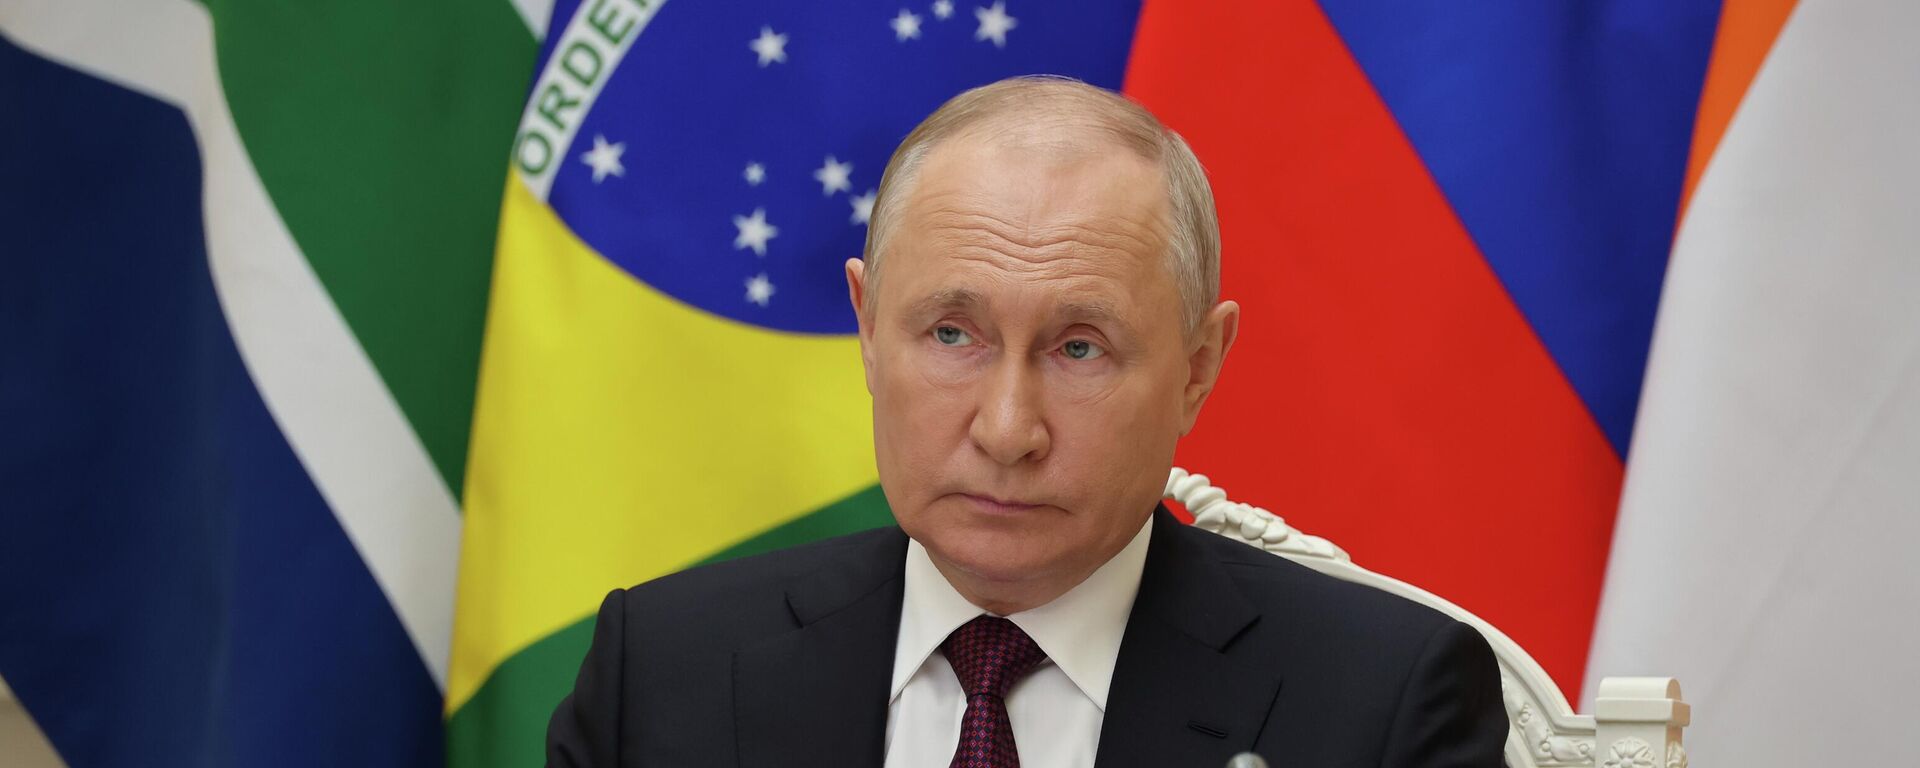 Russian President Vladimir Putin participates via videoconference in the final press conference after the joint meeting of the BRICS leaders with the heads of state and government of the invited countries and multilateral organizations, August 24, 2023 - Sputnik Africa, 1920, 24.08.2023